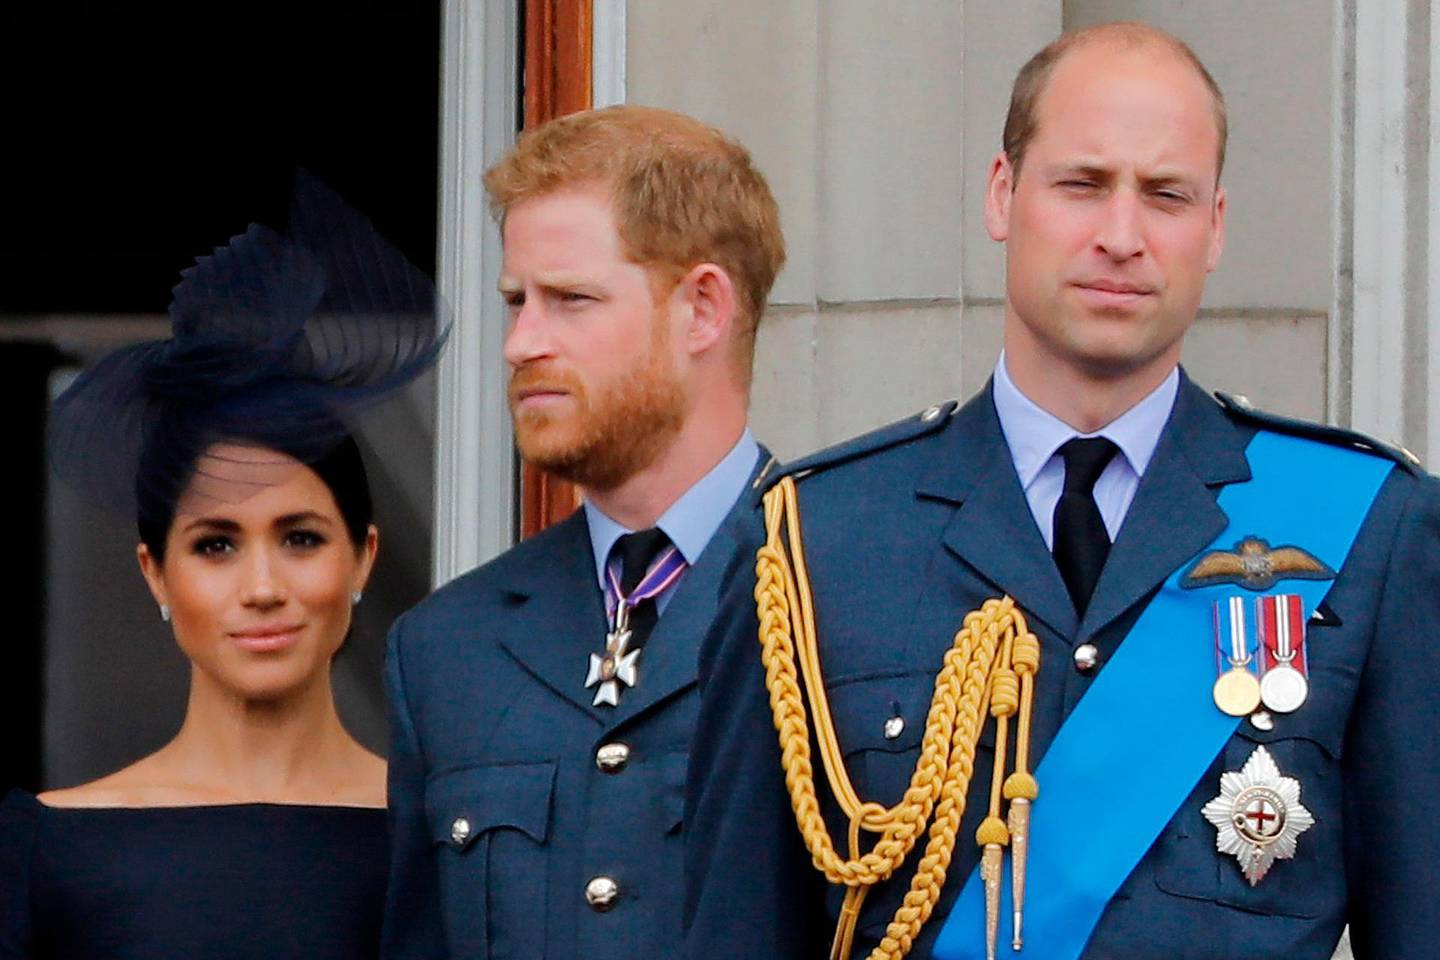 (FILES) In this file photo taken on July 10, 2018 (L-R) Britain's Meghan, Duchess of Sussex, Britain's Prince Harry, Duke of Sussex, and Britain's Prince William, Duke of Cambridge, stand on the balcony of Buckingham Palace to watch a military fly-past to mark the centenary of the Royal Air Force (RAF). Britain's Prince Harry and his wife Meghan will step back as senior members of the royal family and spend more time in North America, the couple said in a shock announcement on January 8, 2020. The surprise news follows a turbulent year for the monarchy, with signs that the couple have increasingly struggled with the pressures of royal life and family rifts. "We intend to step back as 'senior' members of the royal family and work to become financially independent, while continuing to fully support Her Majesty The Queen," they said in a statement released by Buckingham Palace. / AFP / Tolga AKMEN
